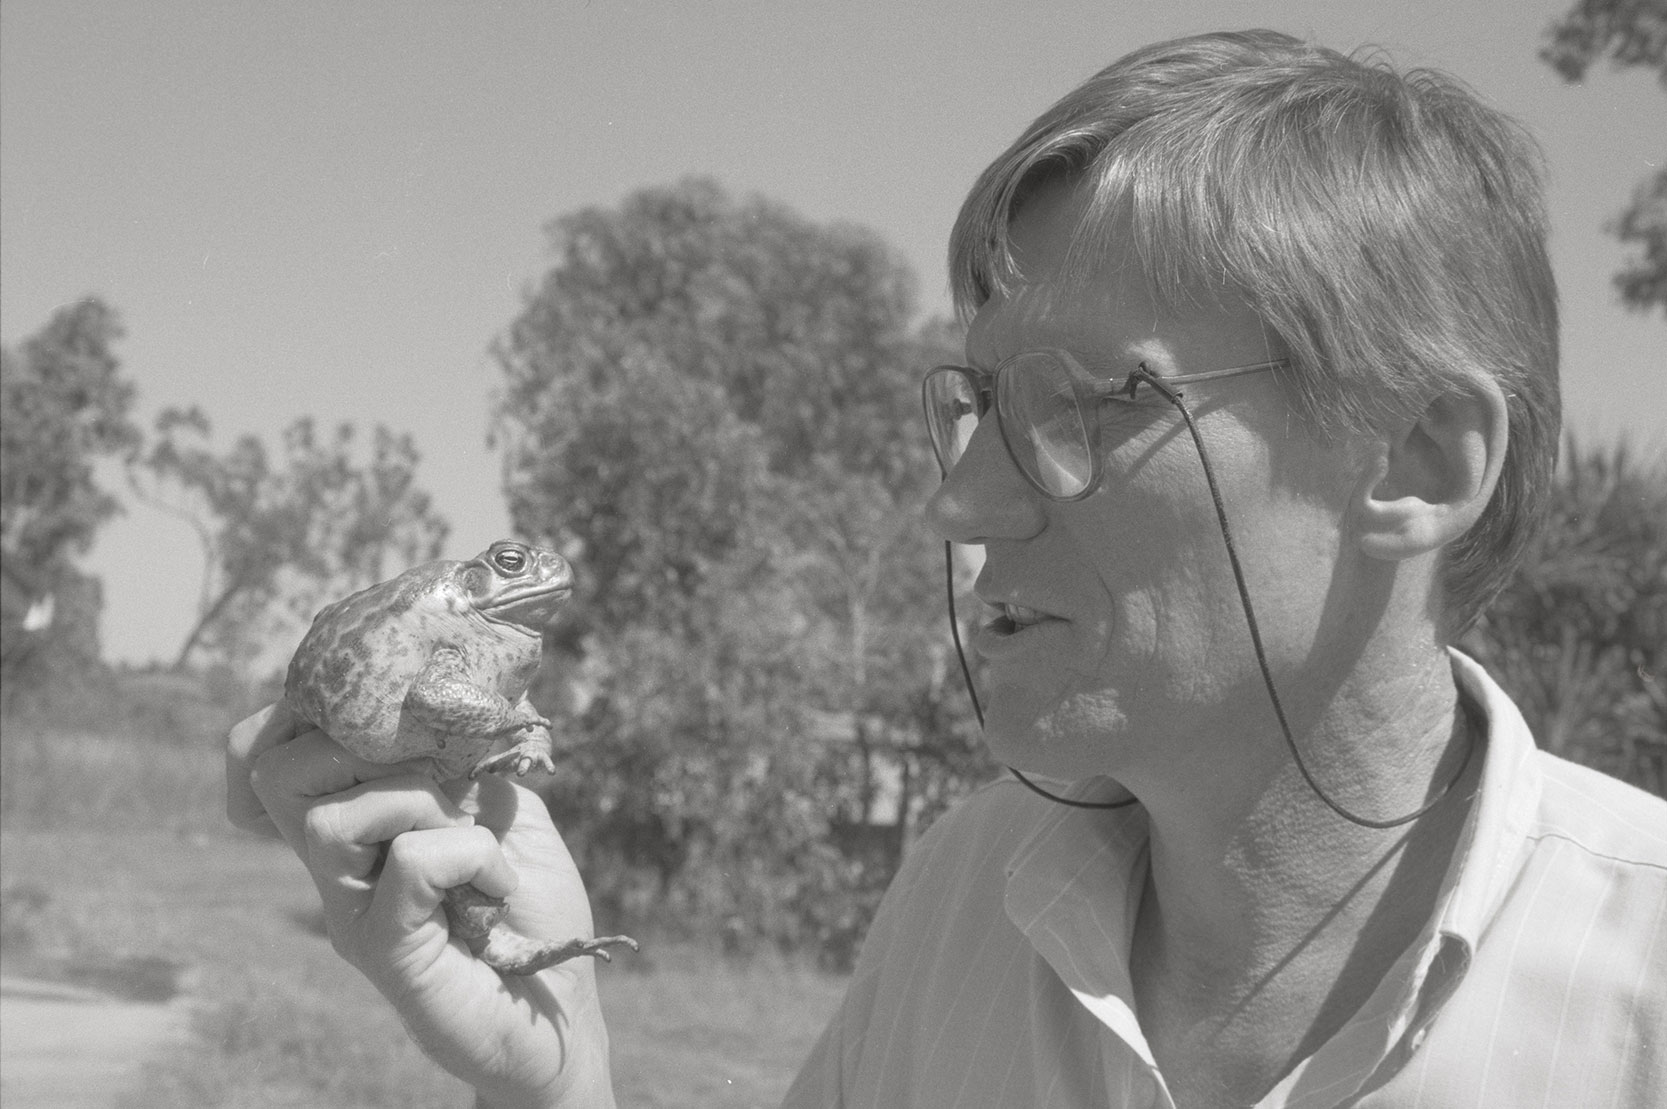 Bill Freeland, CSIRO, with Cane Toad, 31 July 1990<br />Image courtesy of Library & Archives NT,  Department of the Chief Minister, NTRS 3823 P1, Box 11, BW2921, Image 2